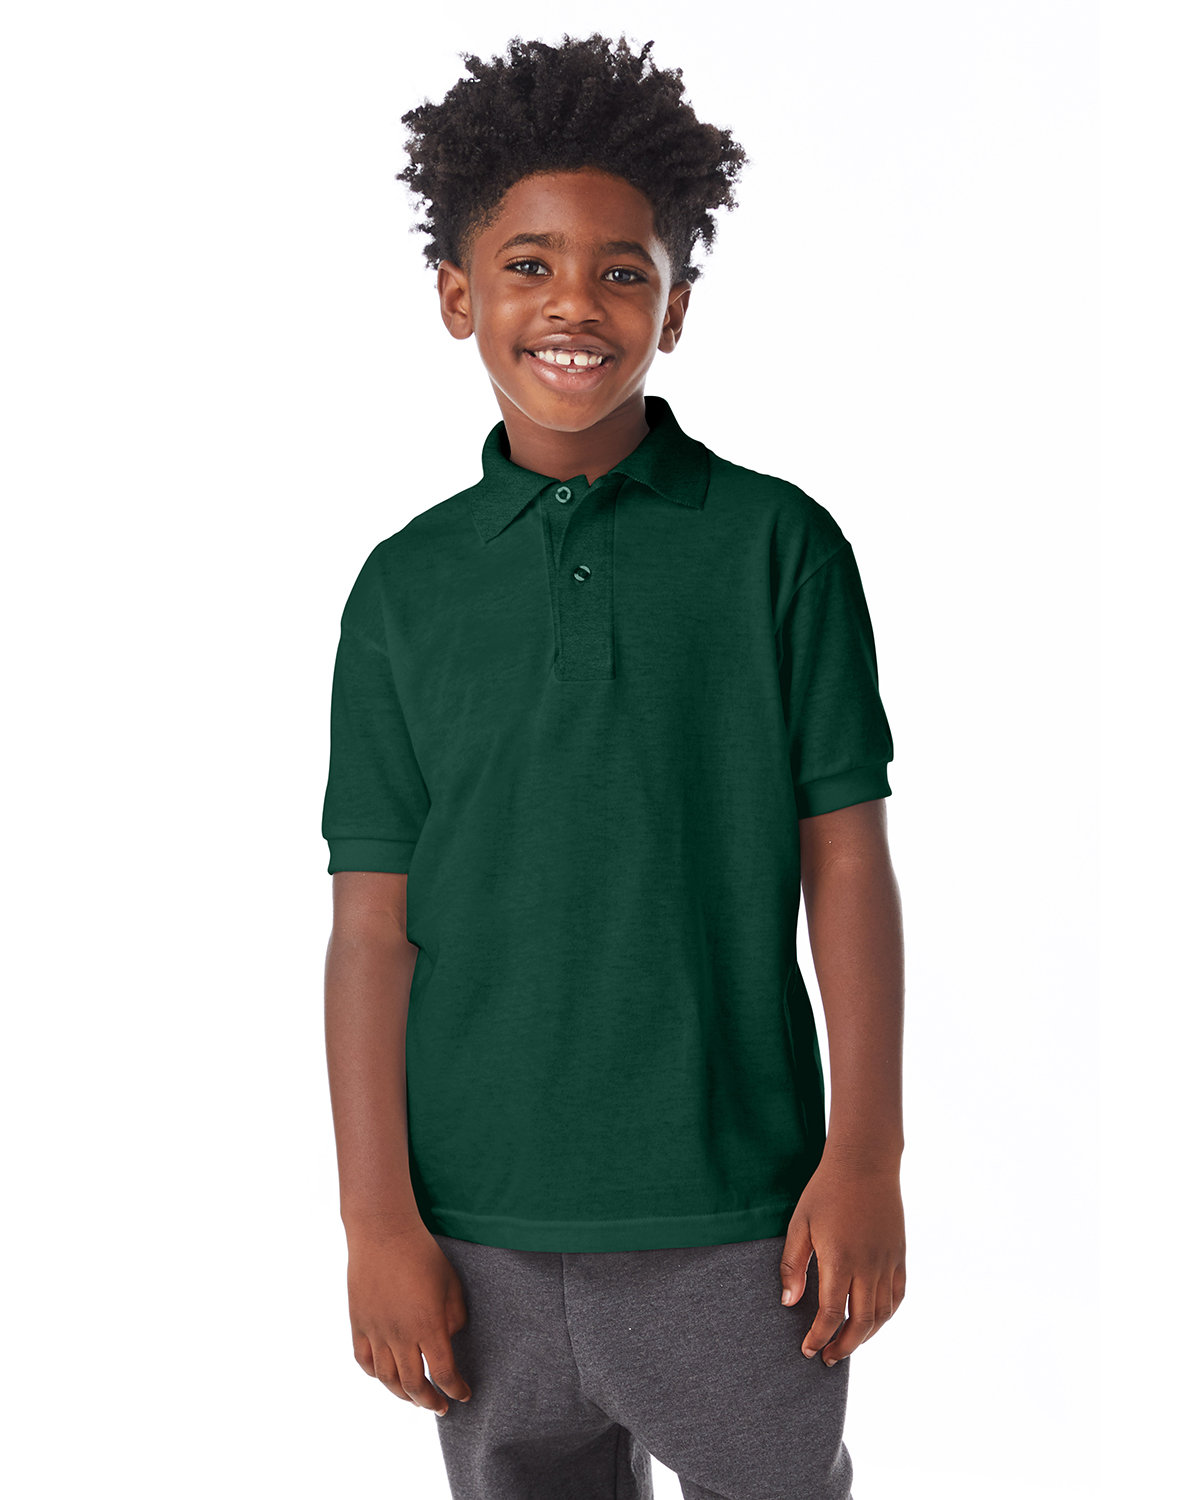 Hanes Youth 50/50 EcoSmart® Jersey Knit Polo DEEP FOREST 